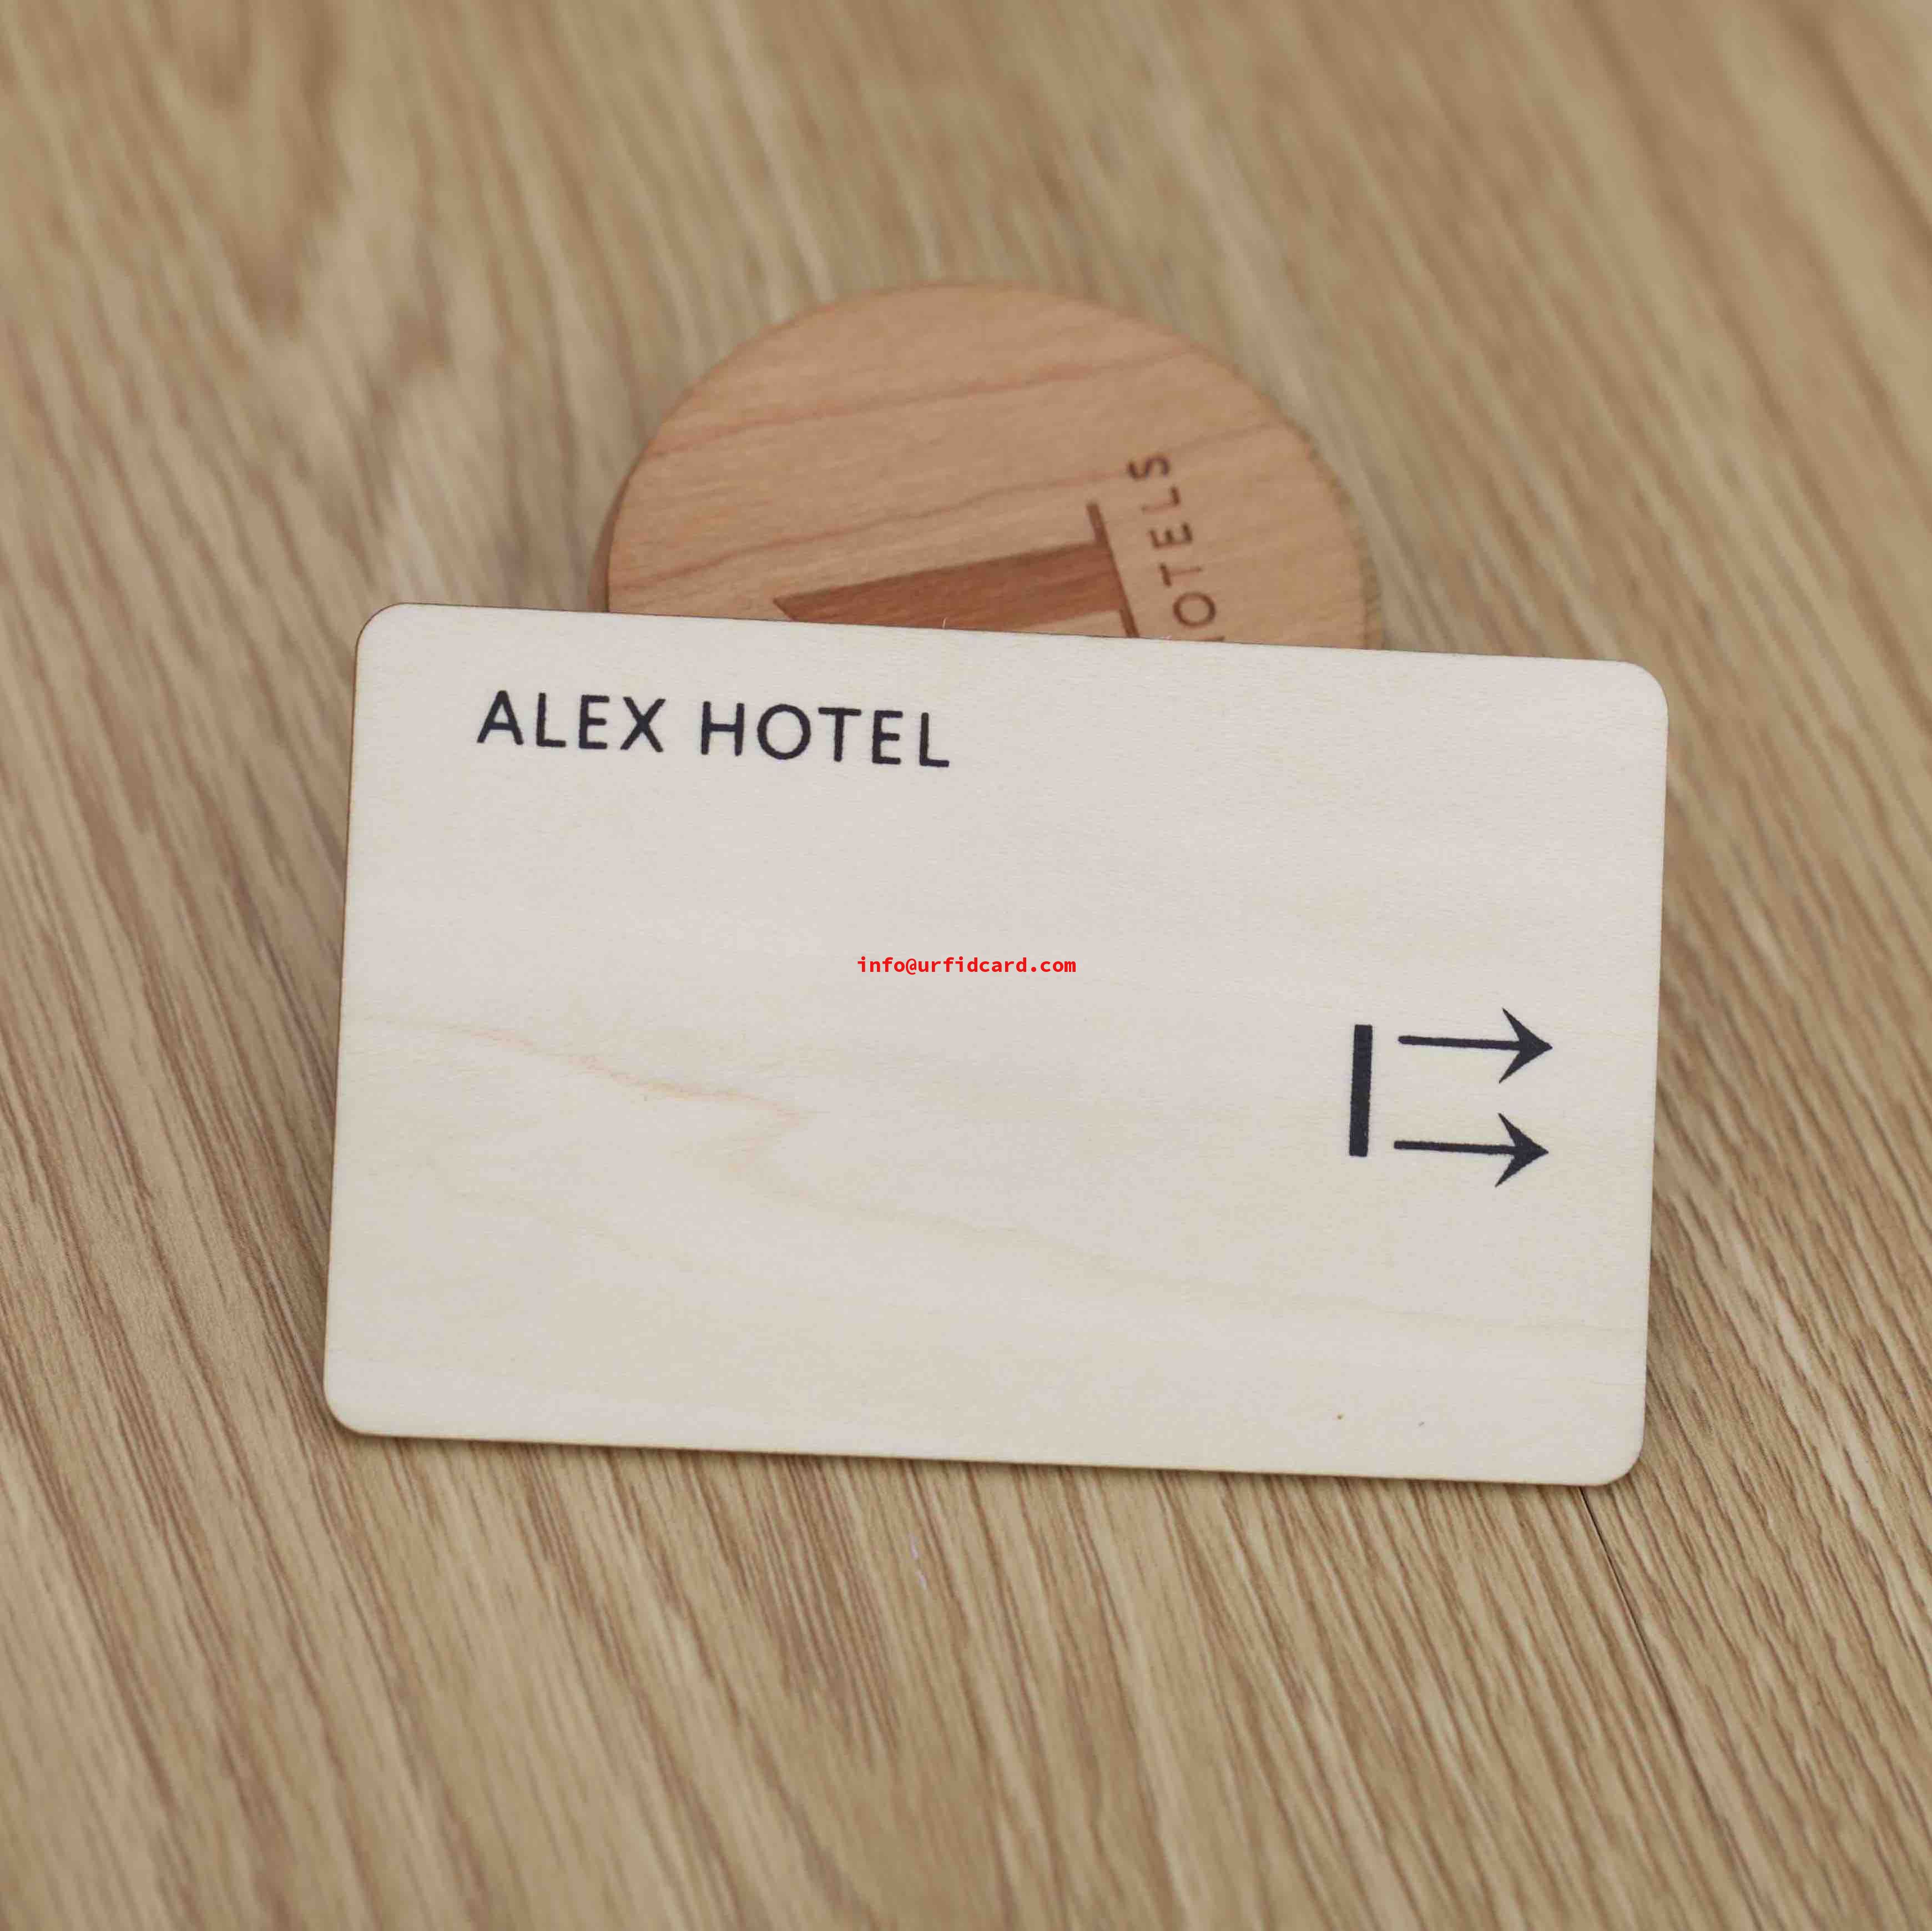 Wood Key Cards Compatible With Major Hotel Locking Systems